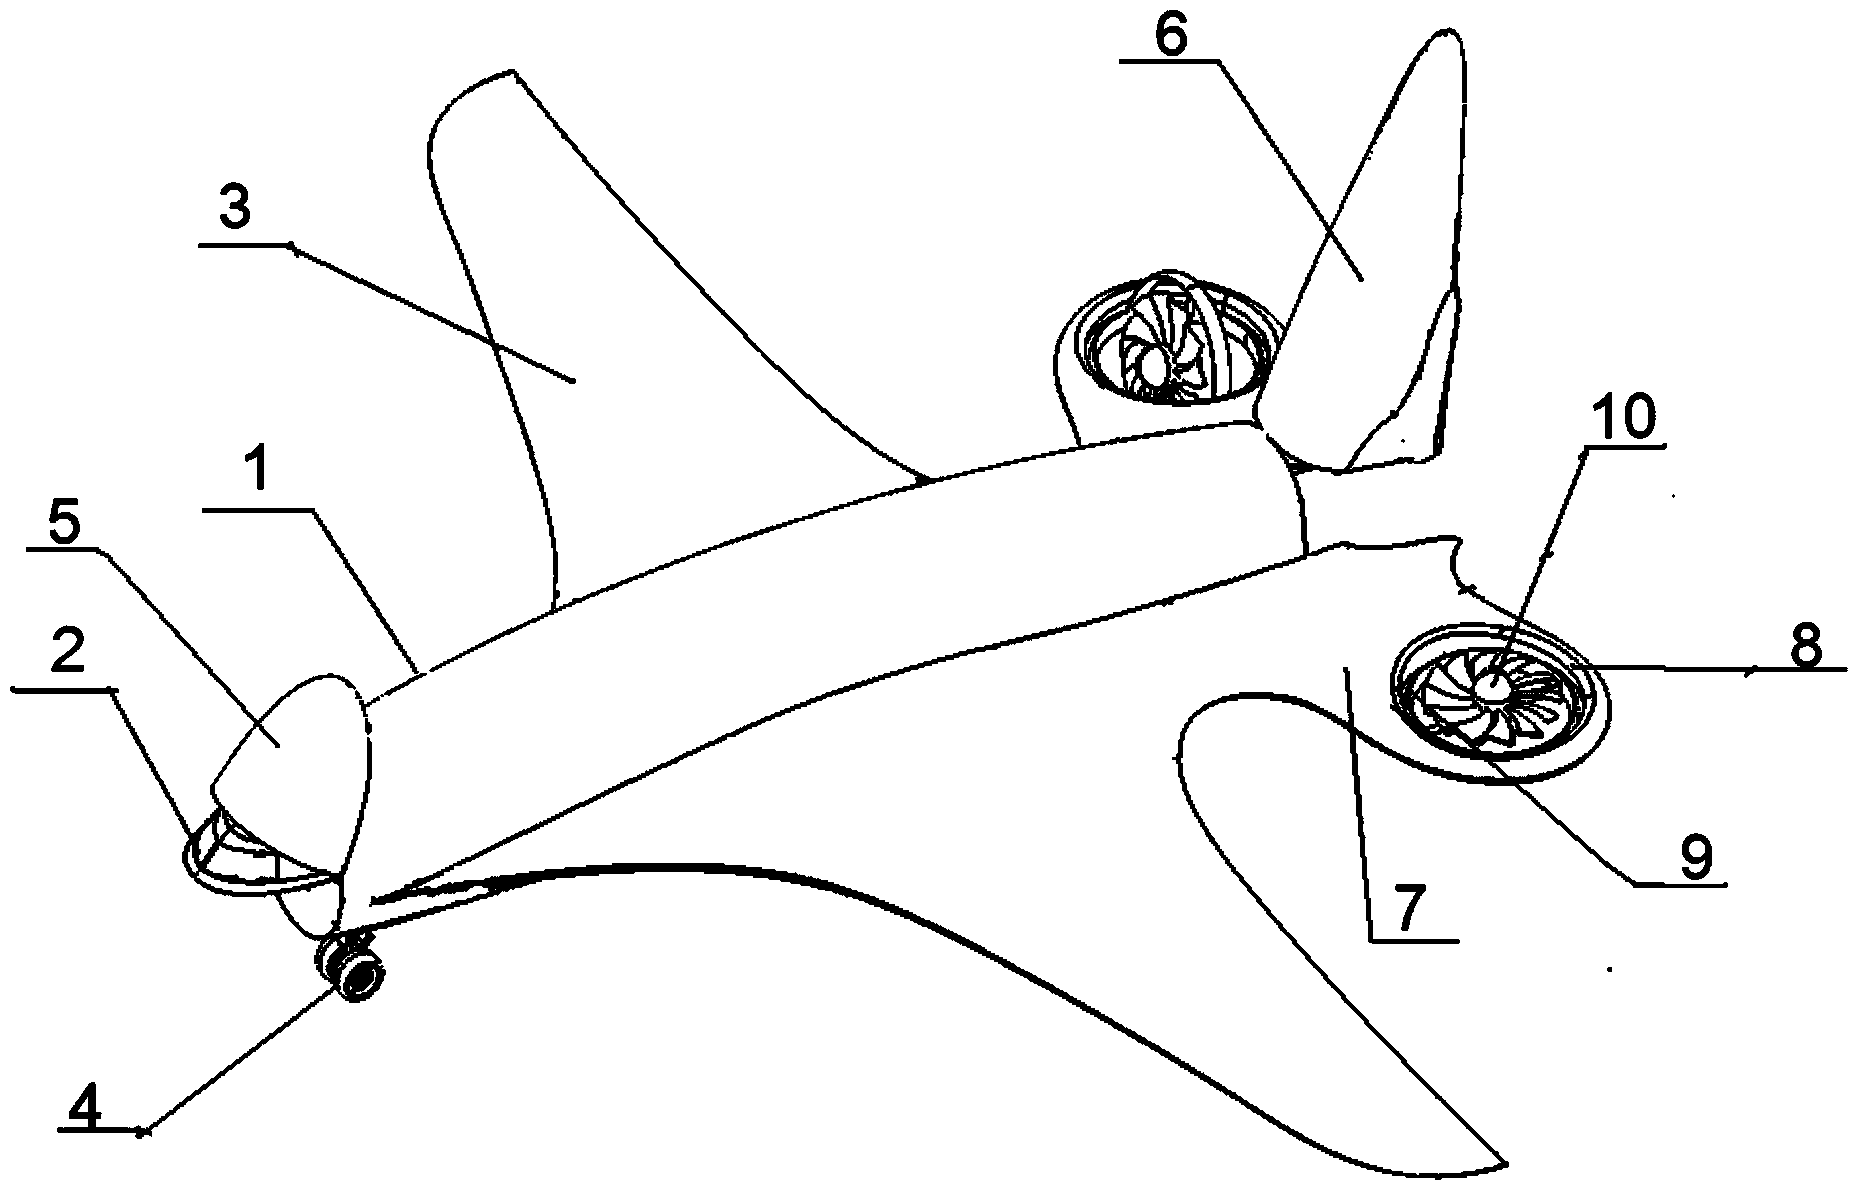 Overall arrangement of large air freighter